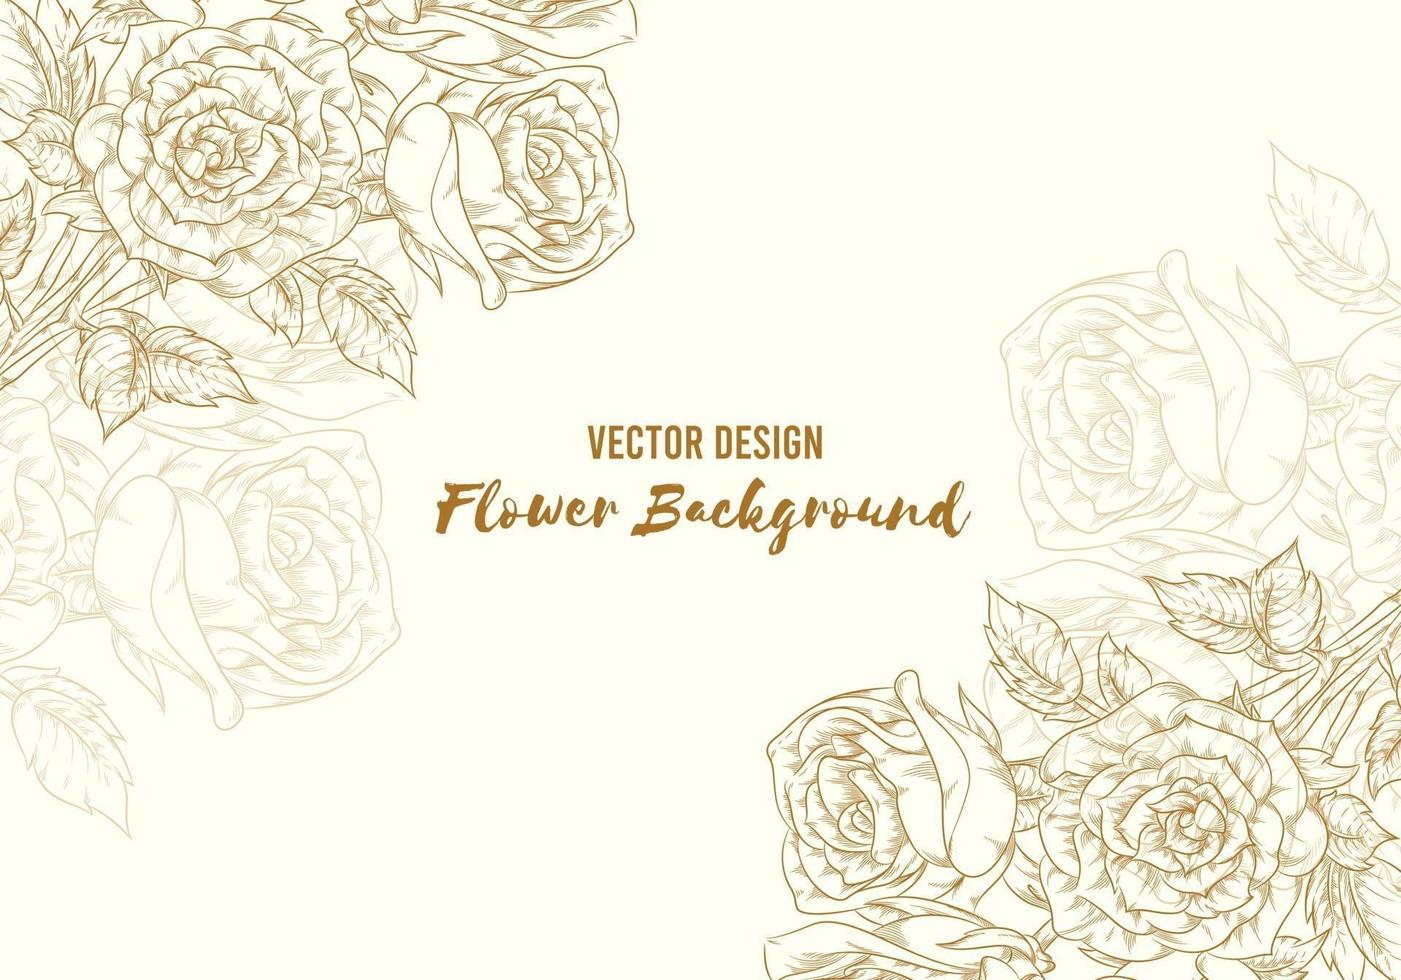 Background of Hand Drawn Rose, Floral Sketch Template Vector Layout